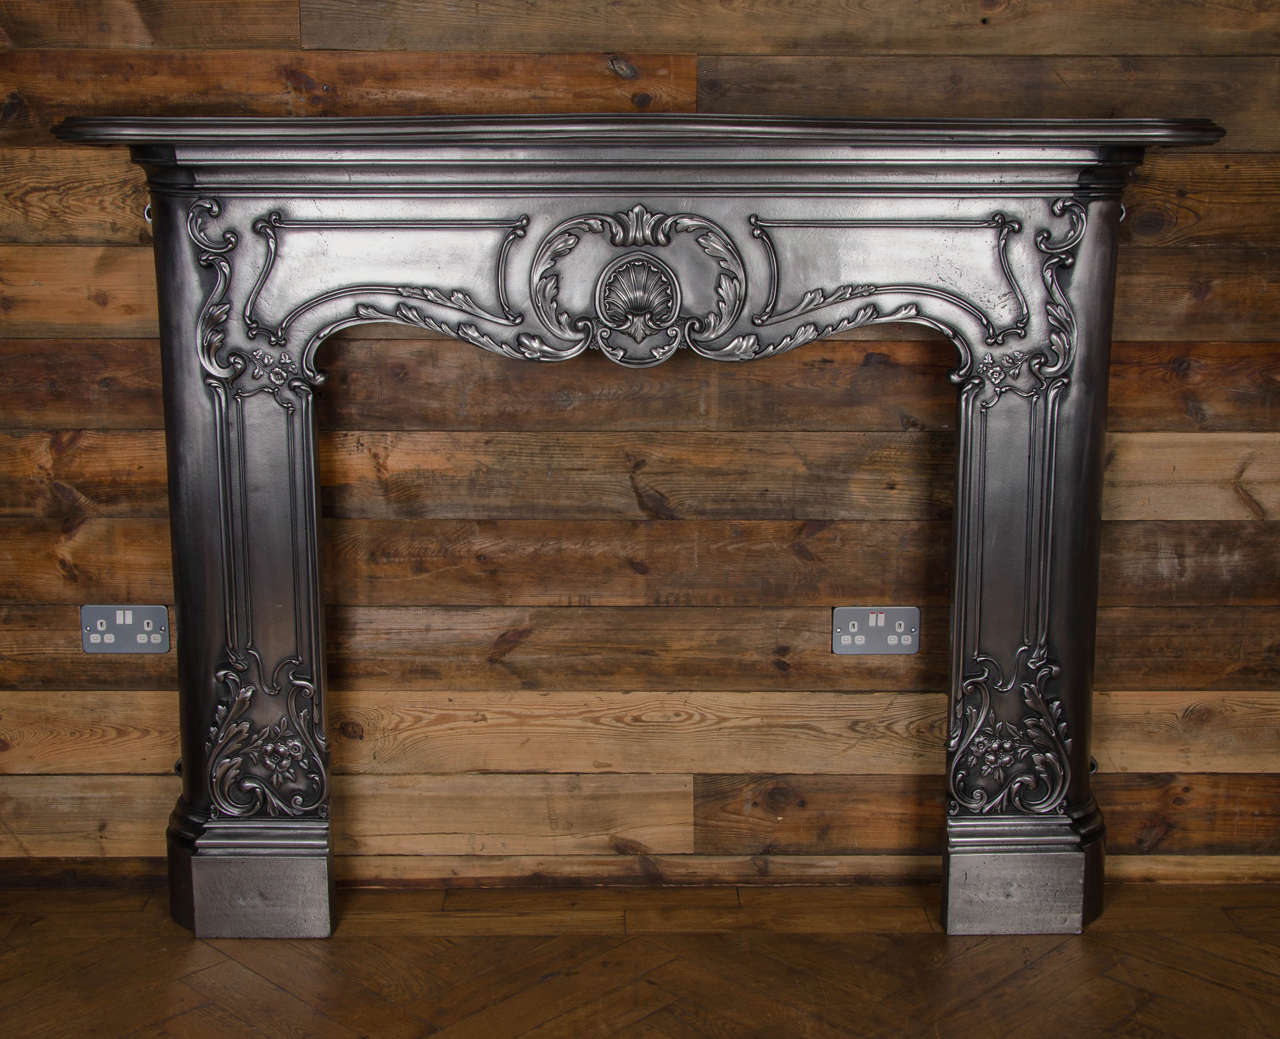 A spectacular cast iron fireplace surround in the Louis XV manner. This reclaimed surround has been polished to accentuate the ornate design and detail. The surround features an elegant serpentine shelf and curved opening. A shell motif on the